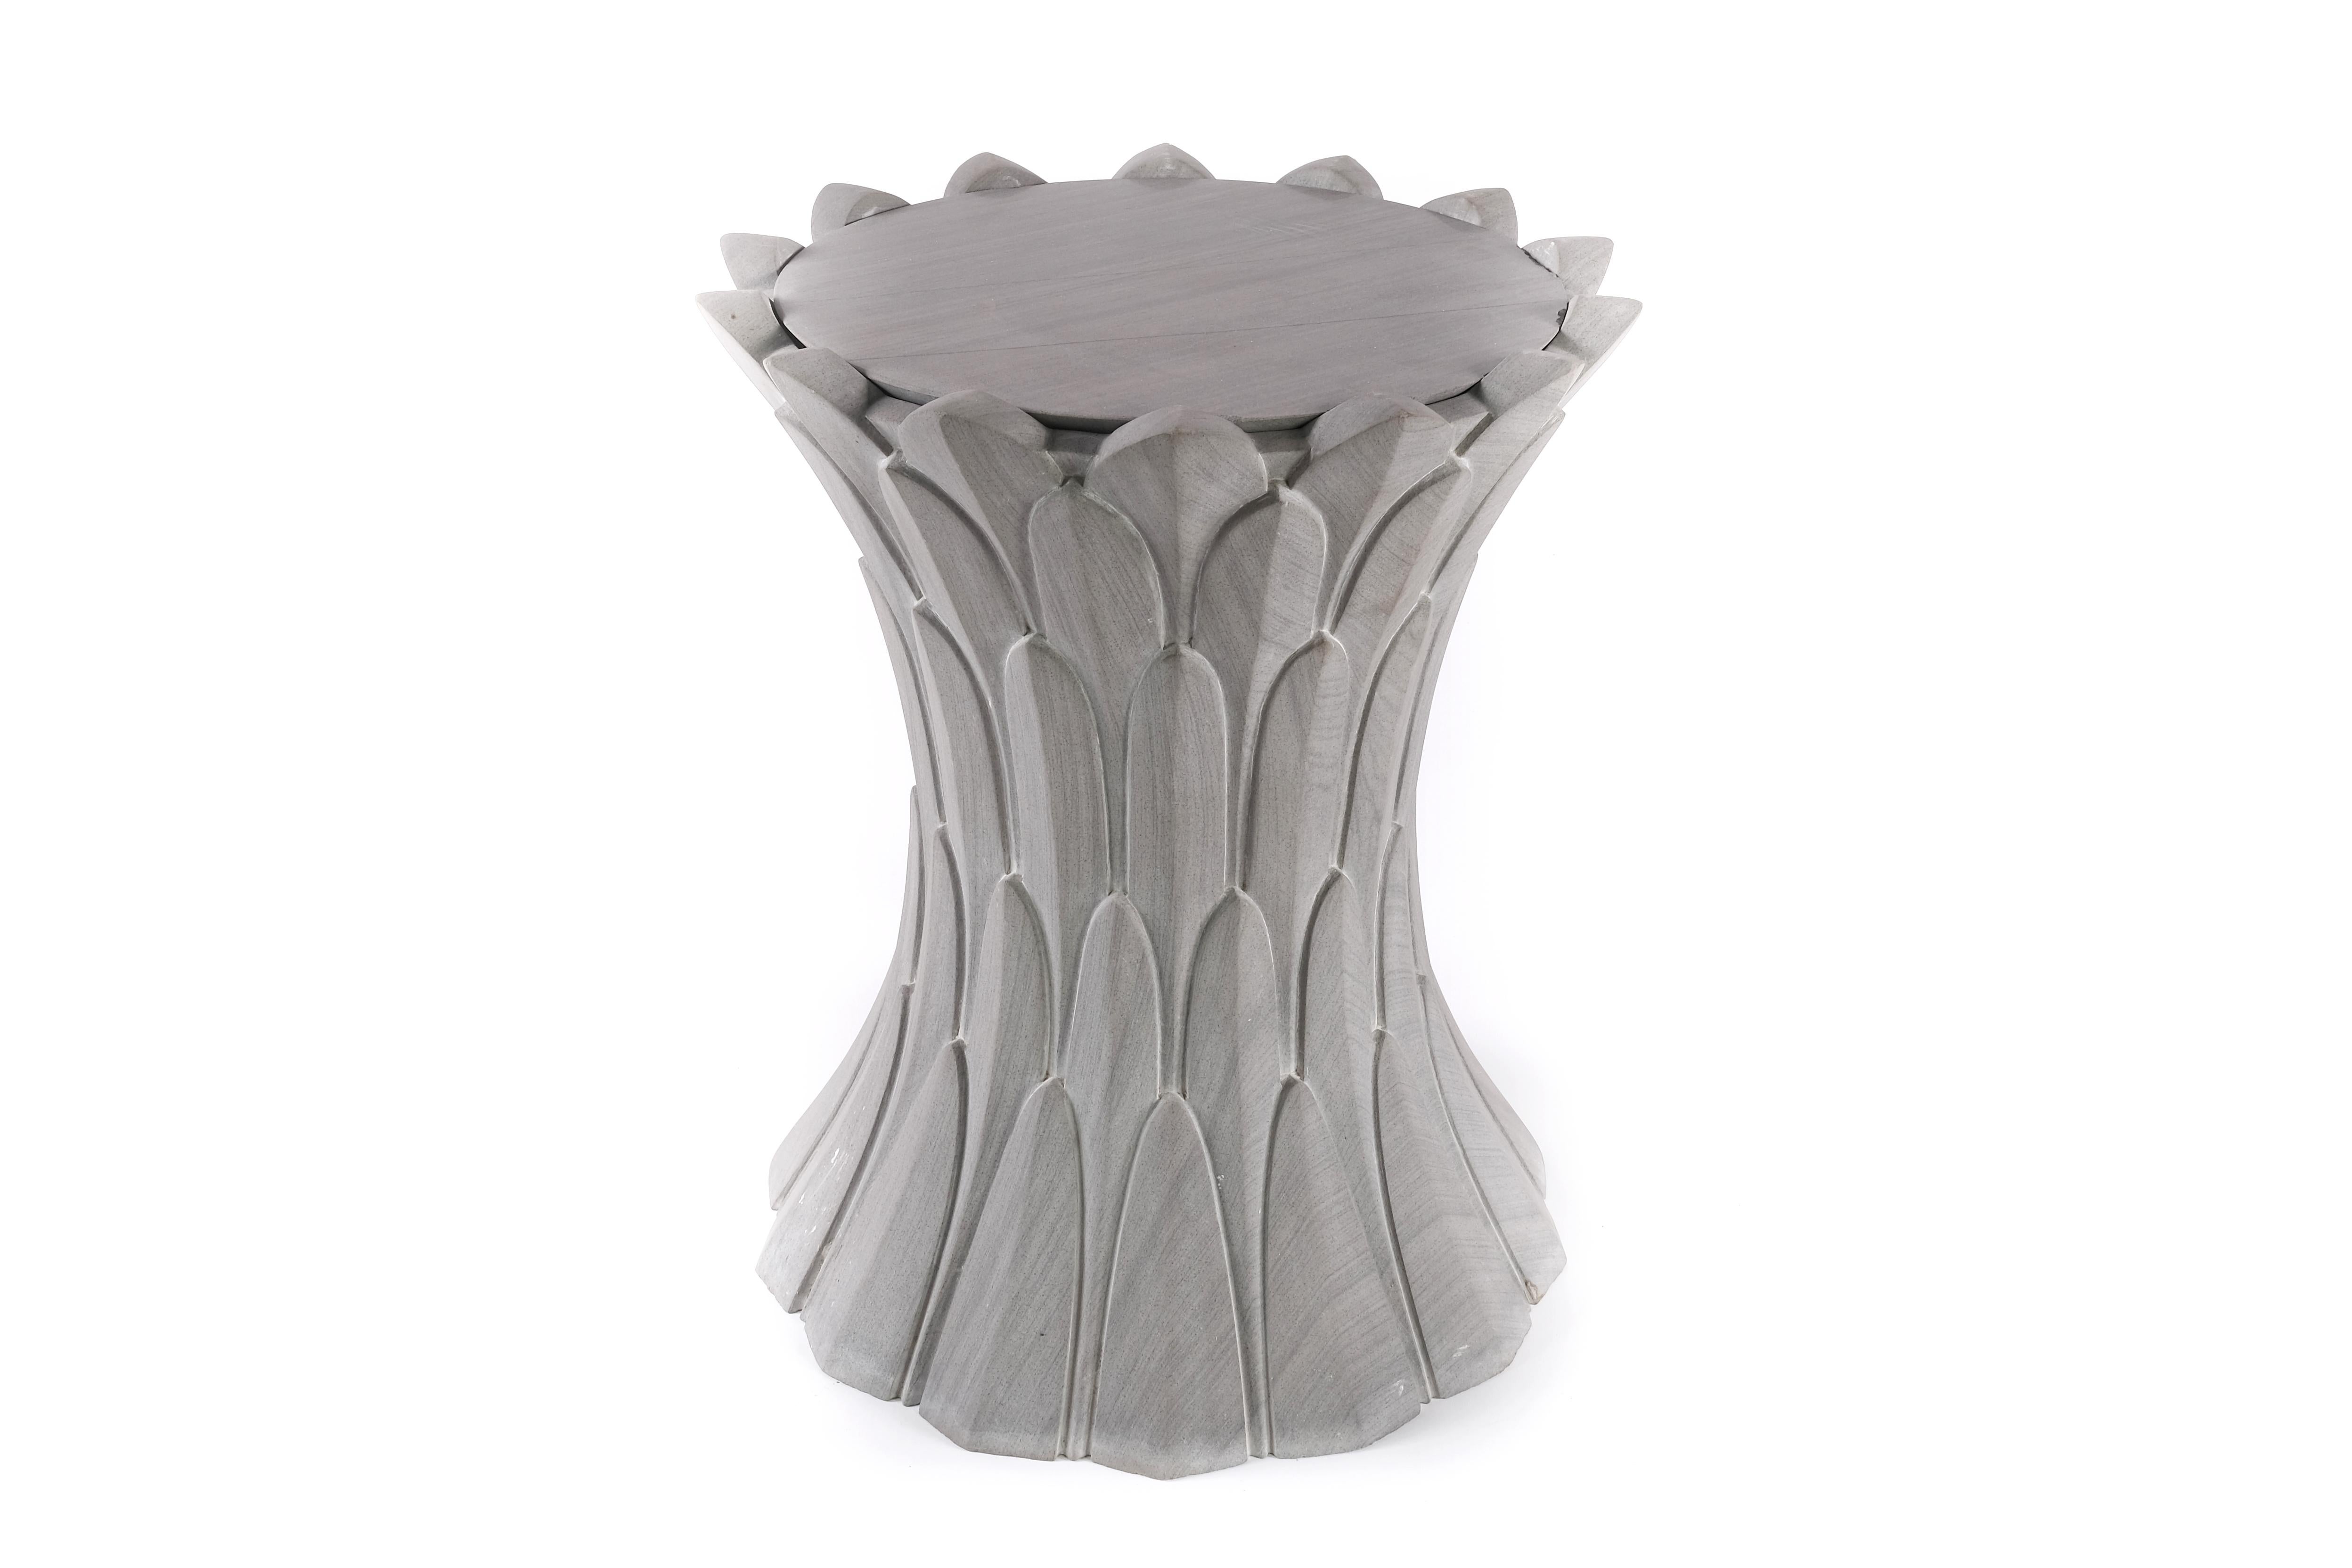 Feathers Marble Side Table or Small Round Marble Side Table is a true masterpiece of craftsmanship, hand-carved by skilled artisans in India who have honed their craft over generations. These artisans use traditional techniques to create each